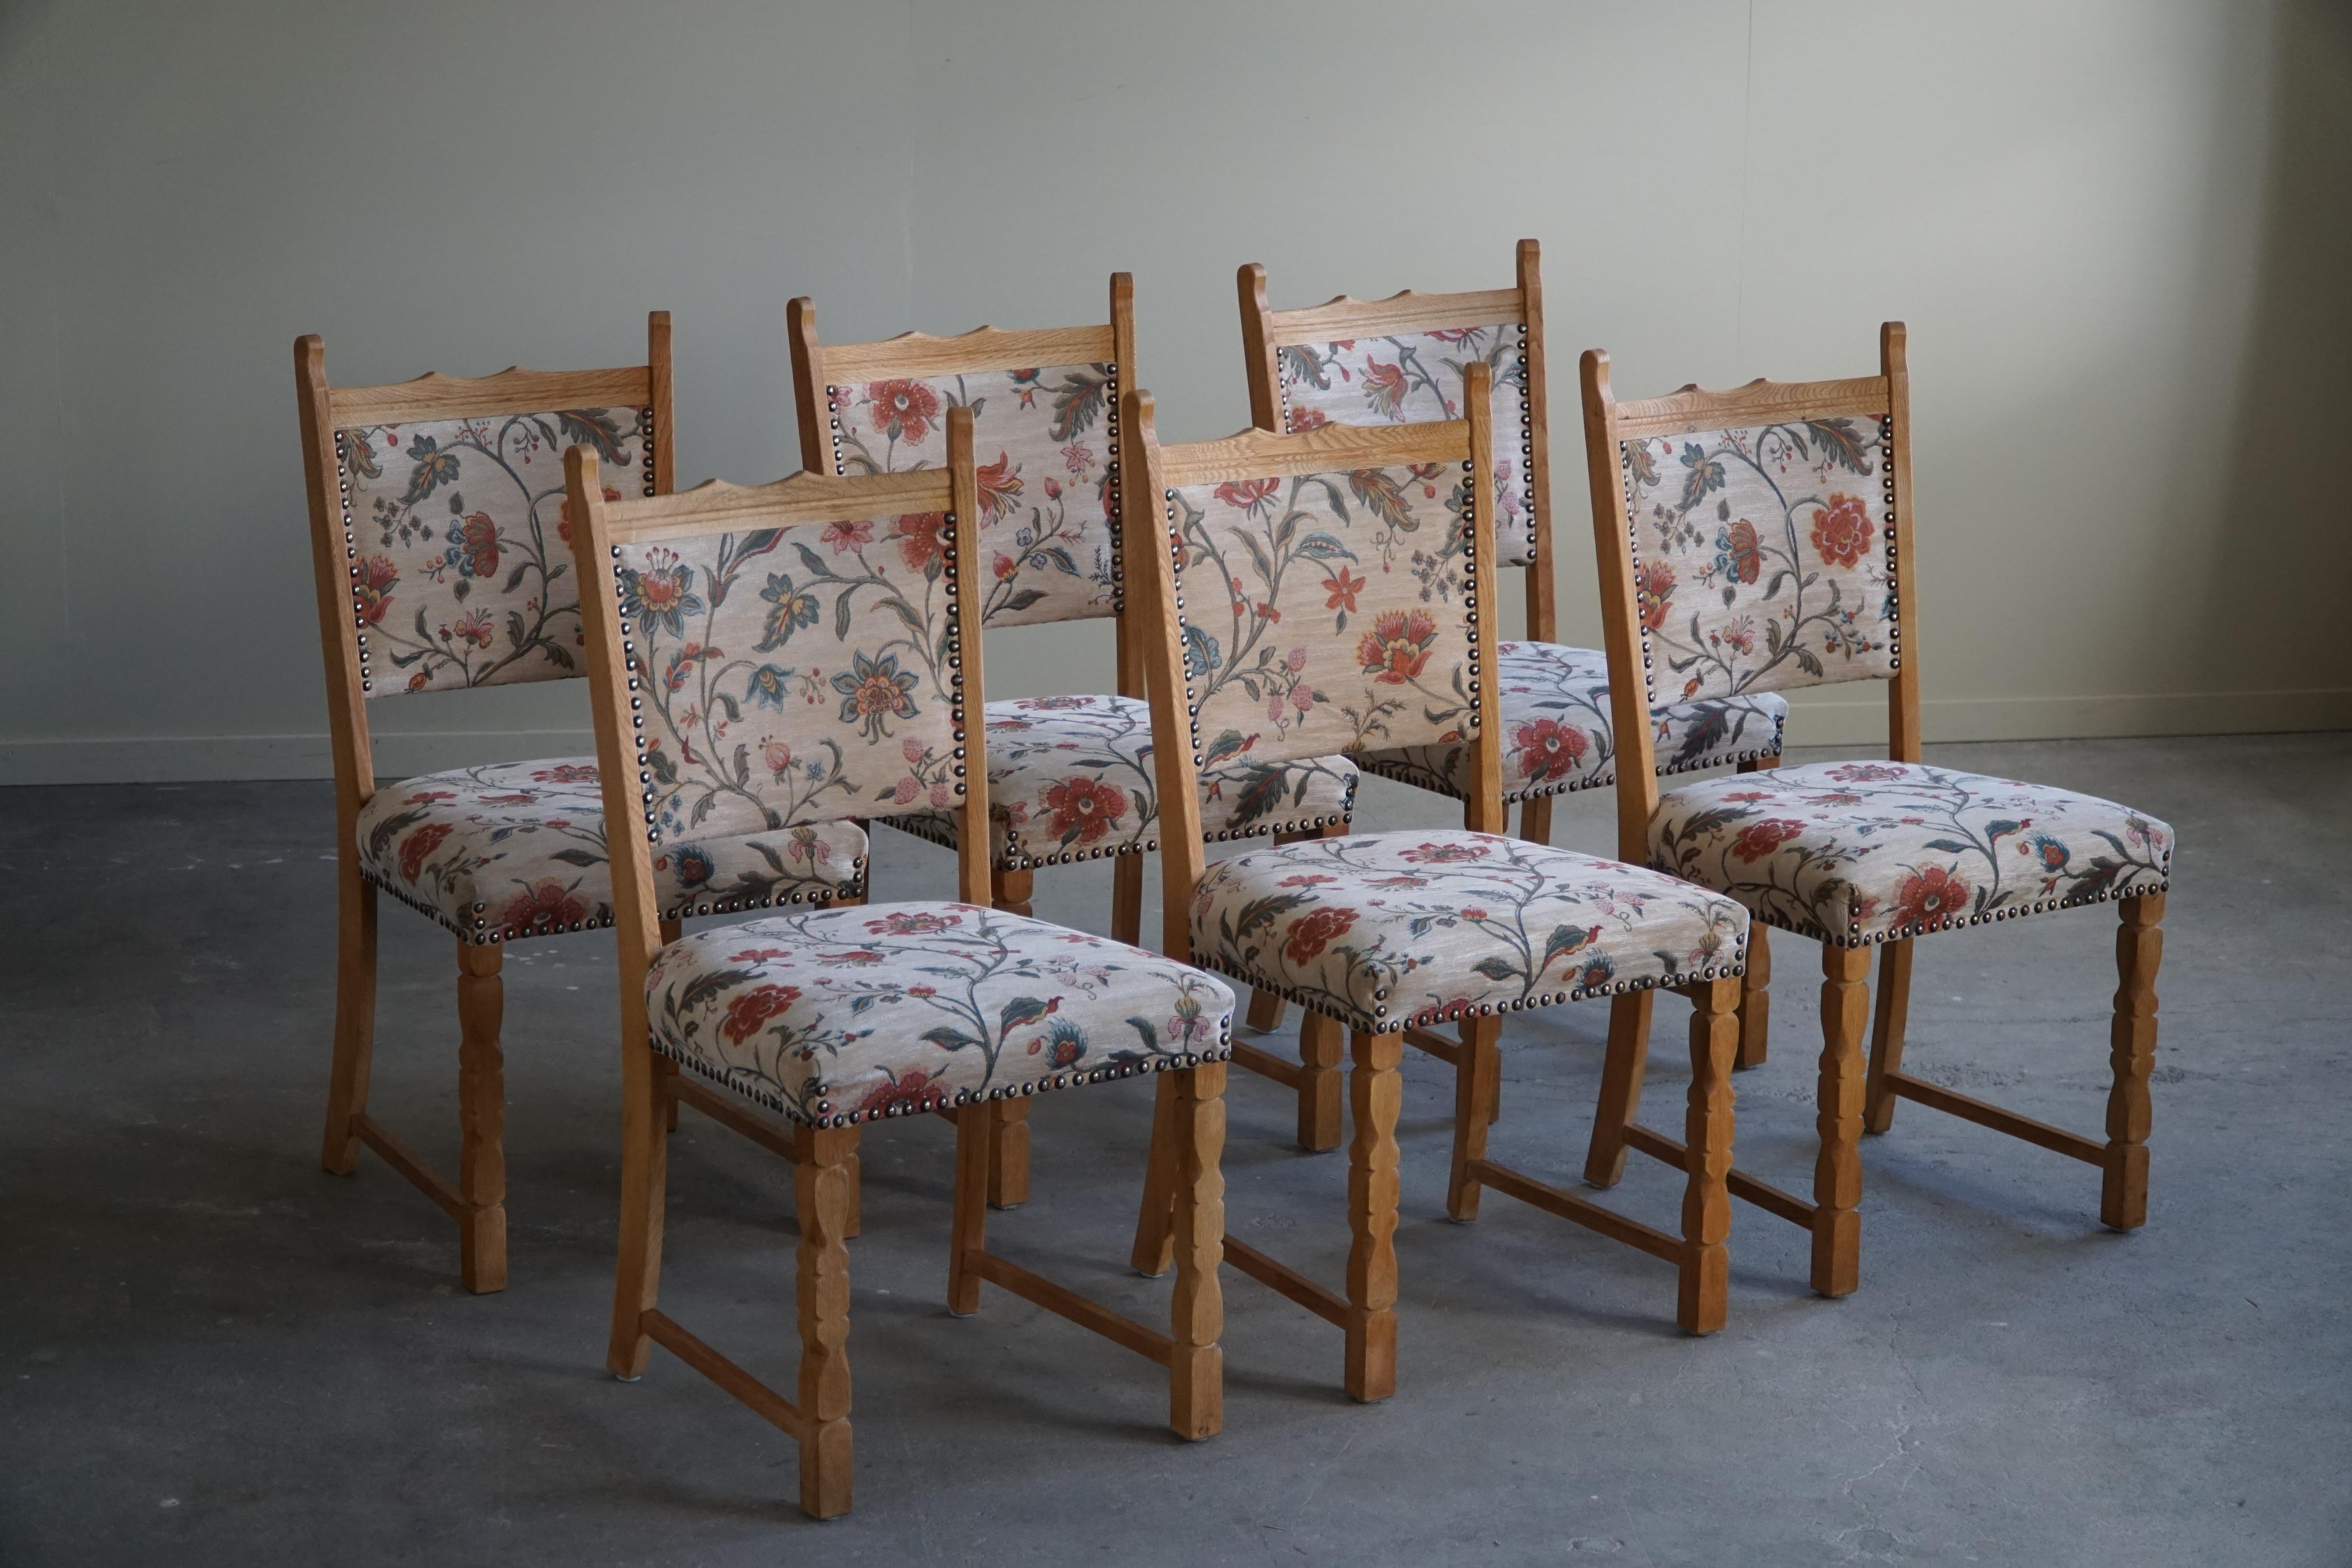 Mid-Century Modern A Set of 6 Dining Room Chairs in Oak & Fabric by a Danish Cabinetmaker, 1950s